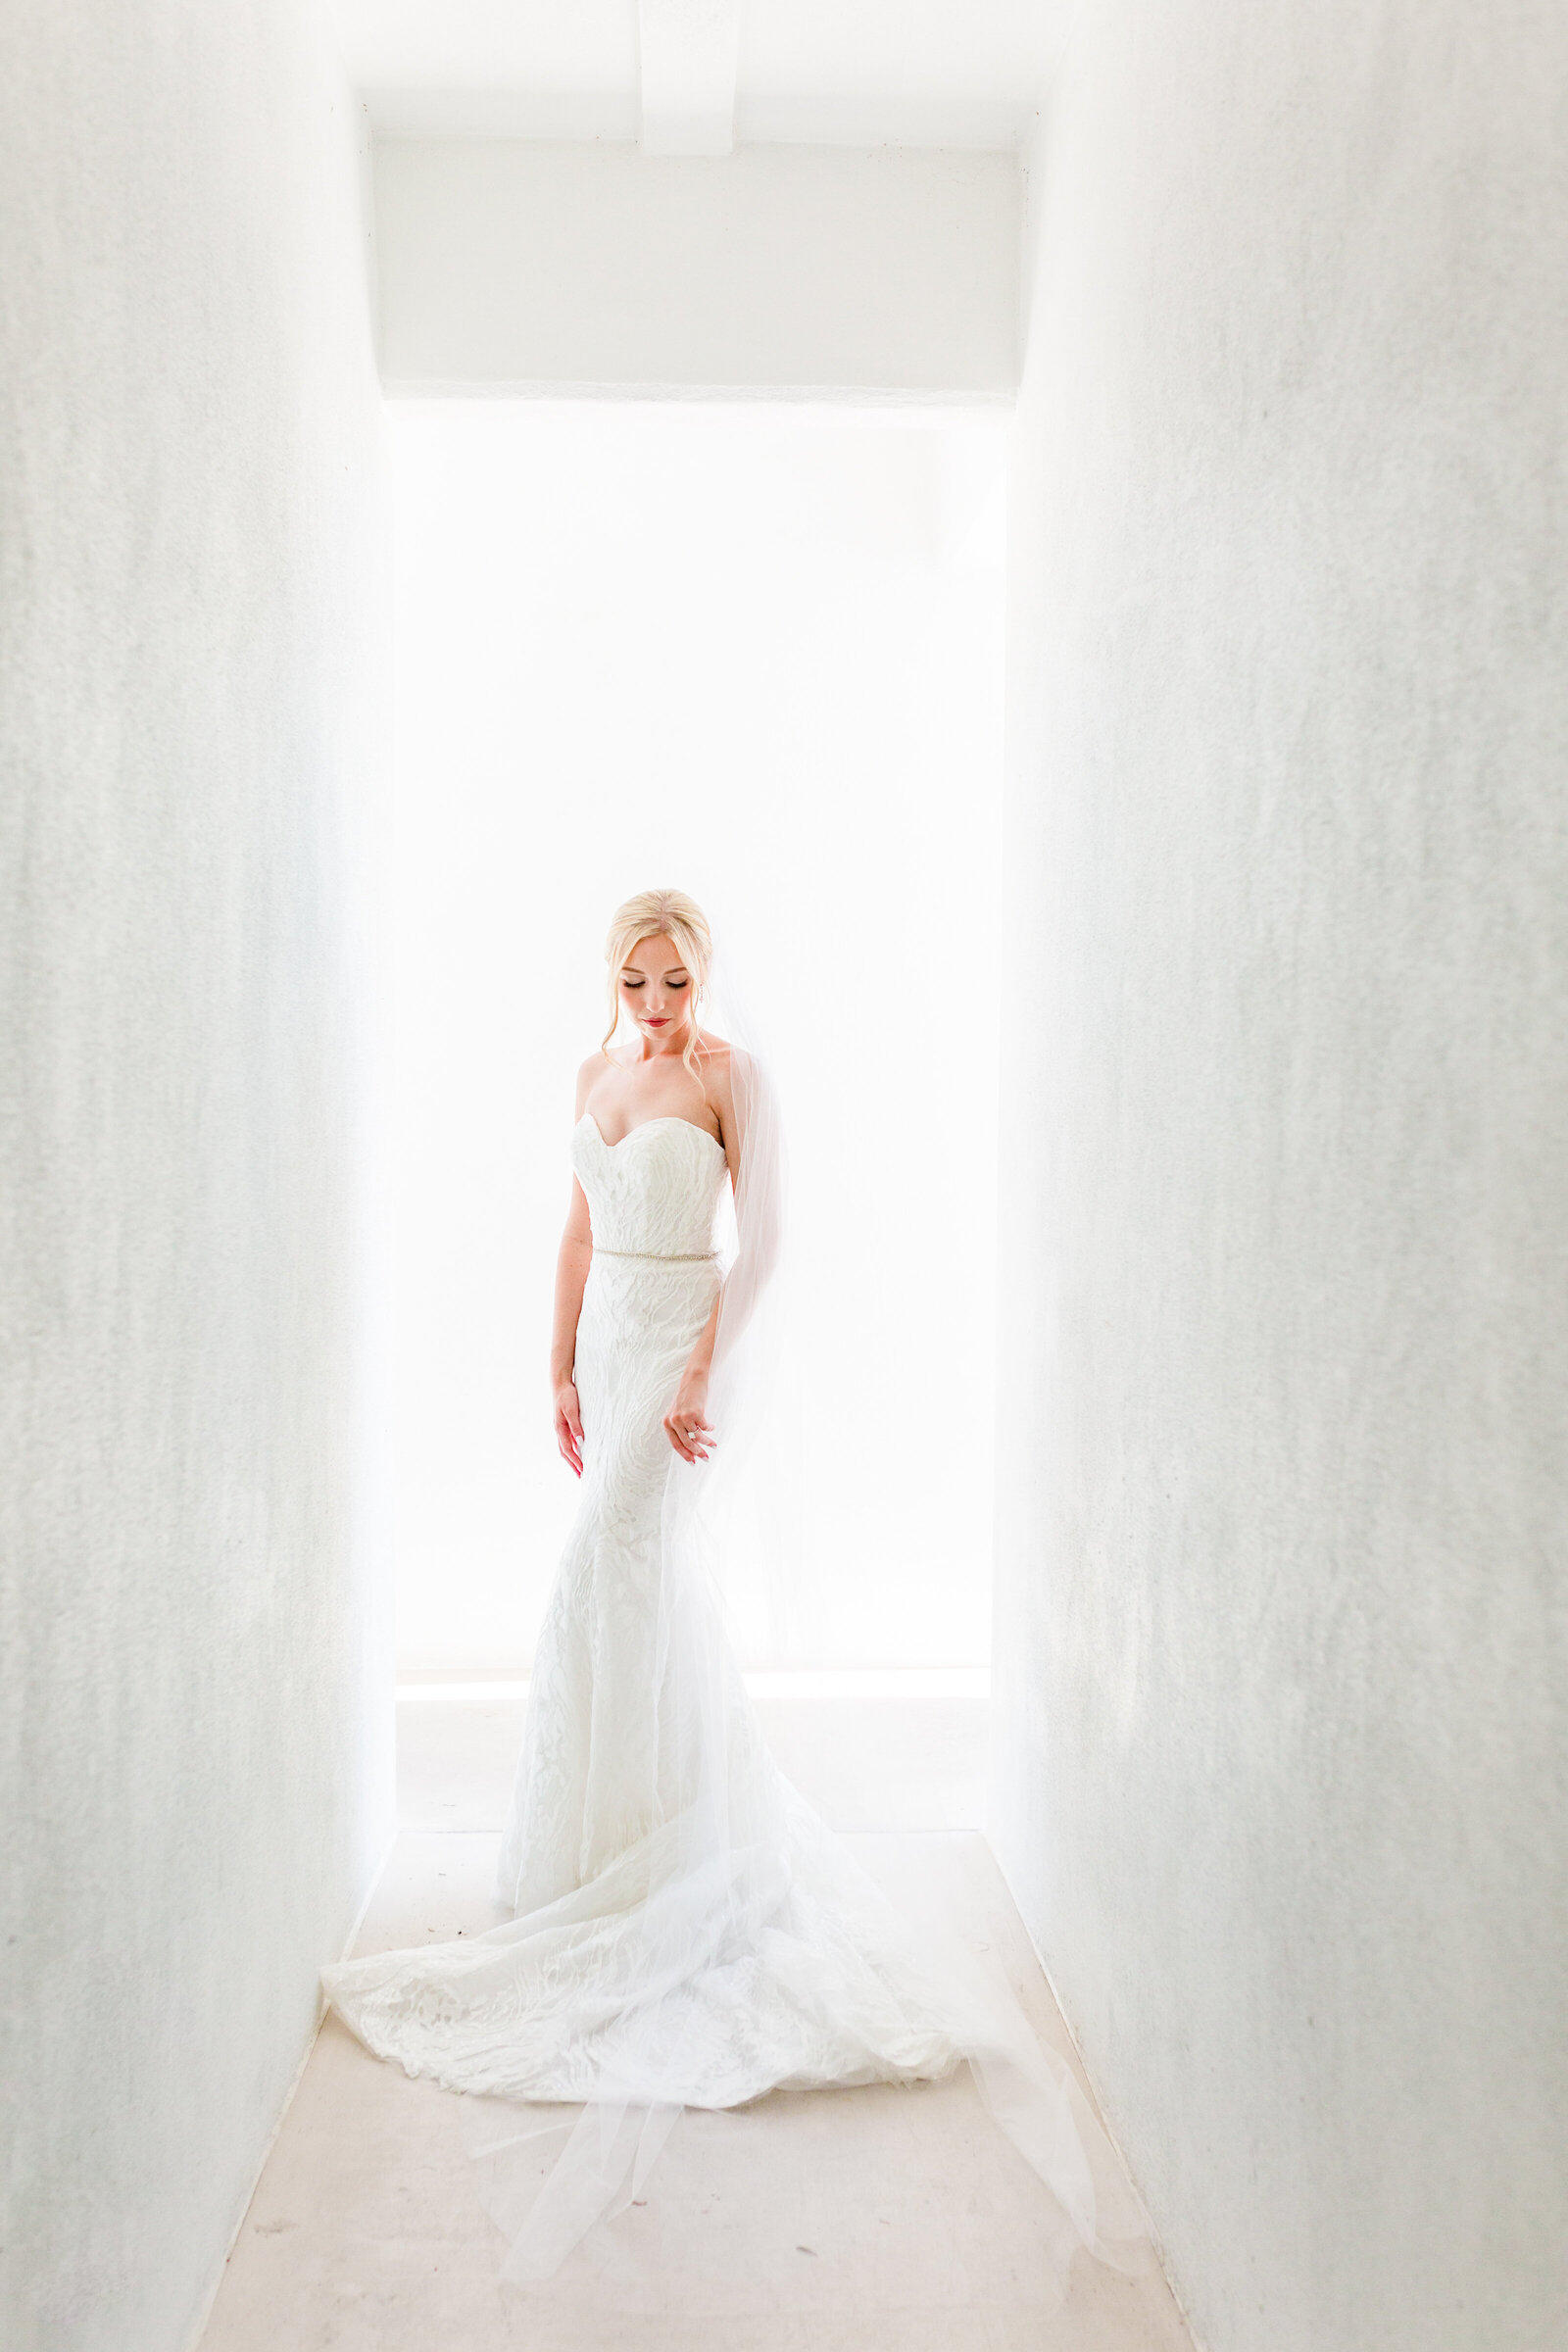 Tampa Wedding photographers capture image of bride in white hallway at venue